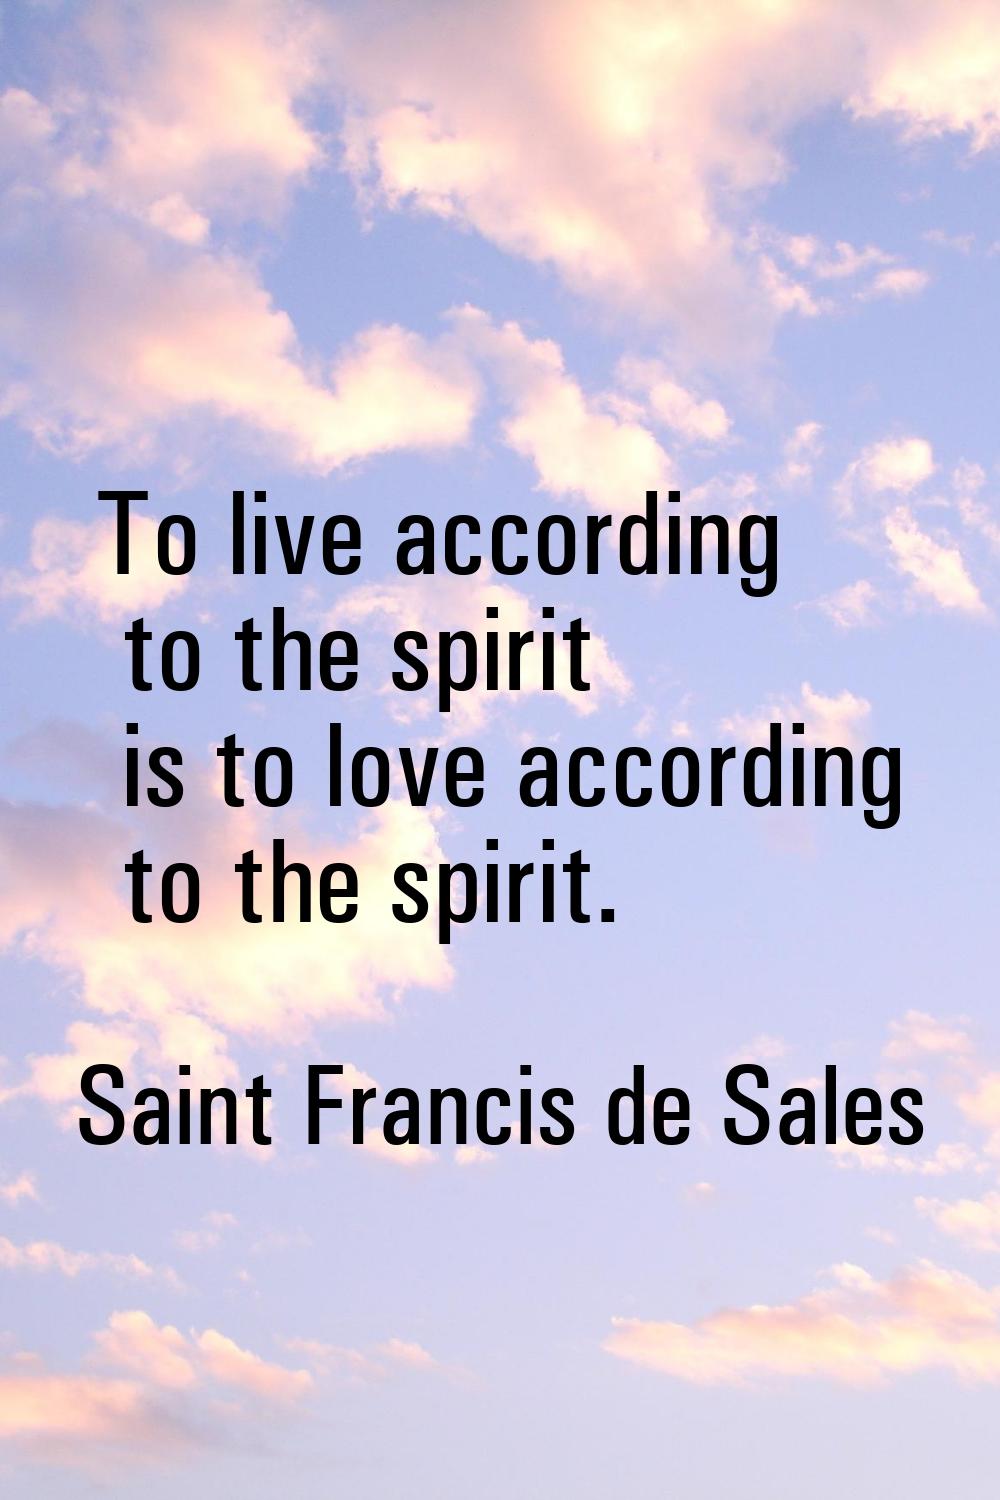 To live according to the spirit is to love according to the spirit.